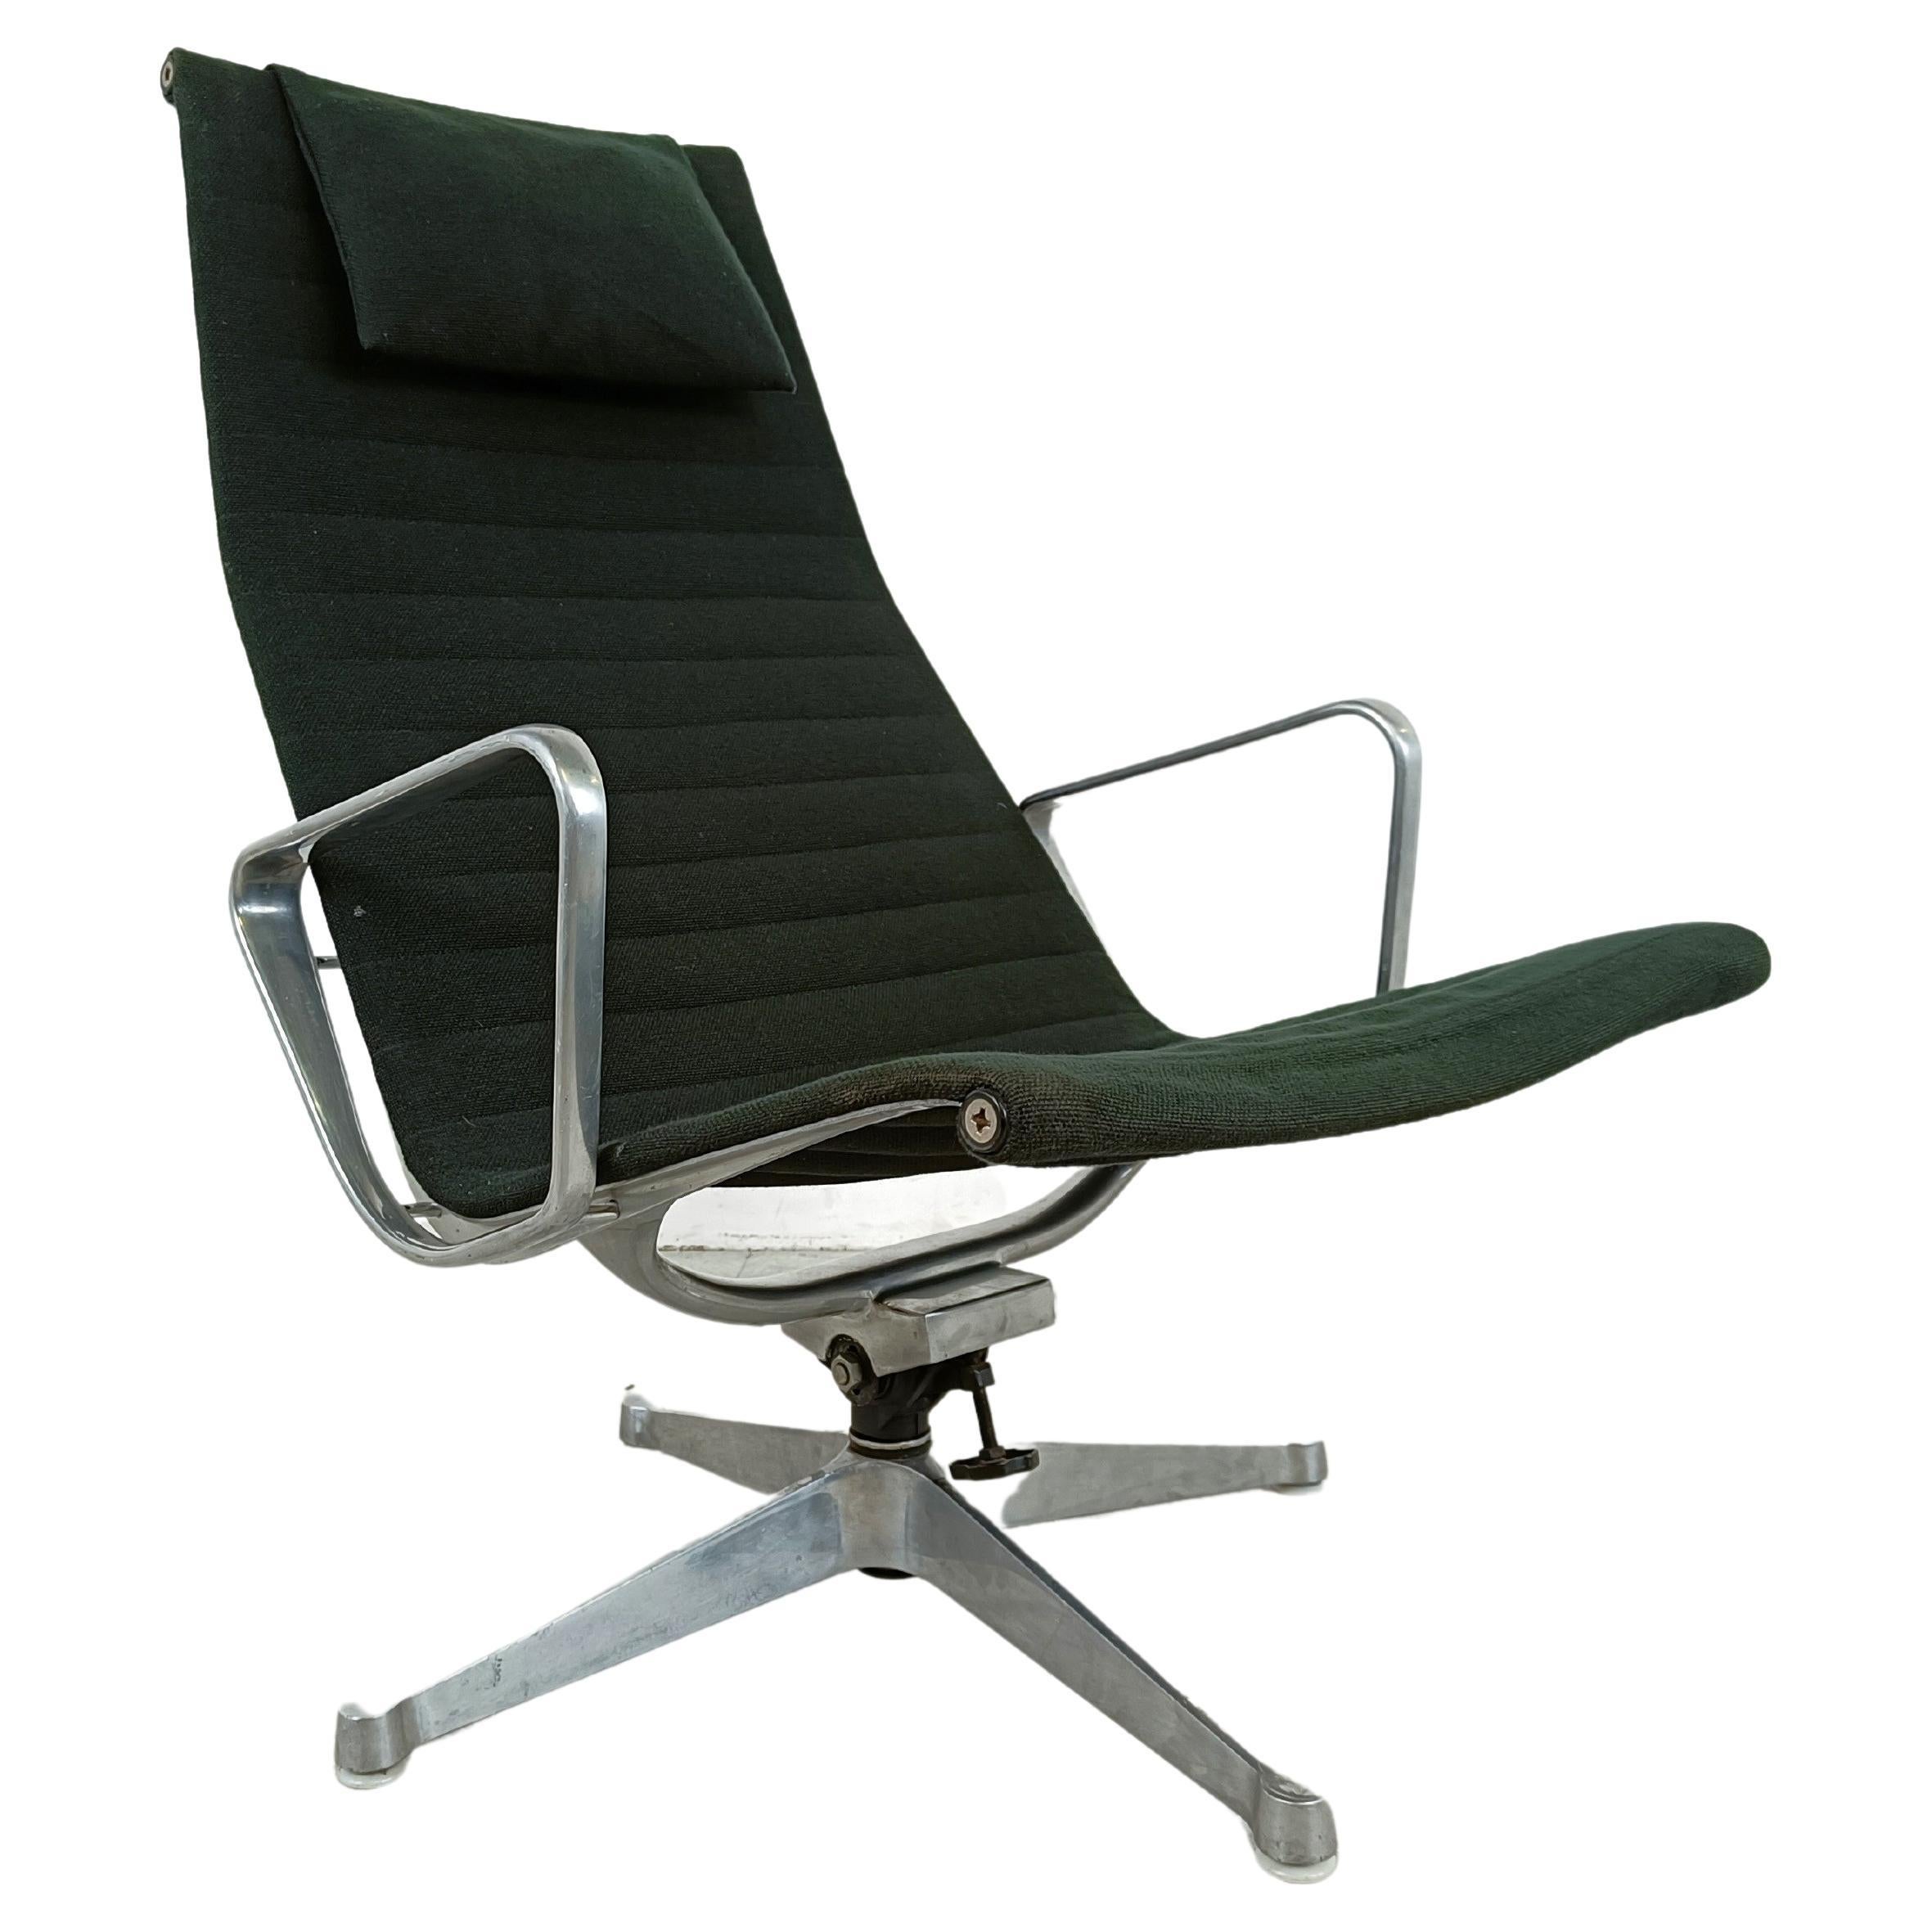 Charles & Ray Eames EA124 Lounge chair in black fabric, 1970s